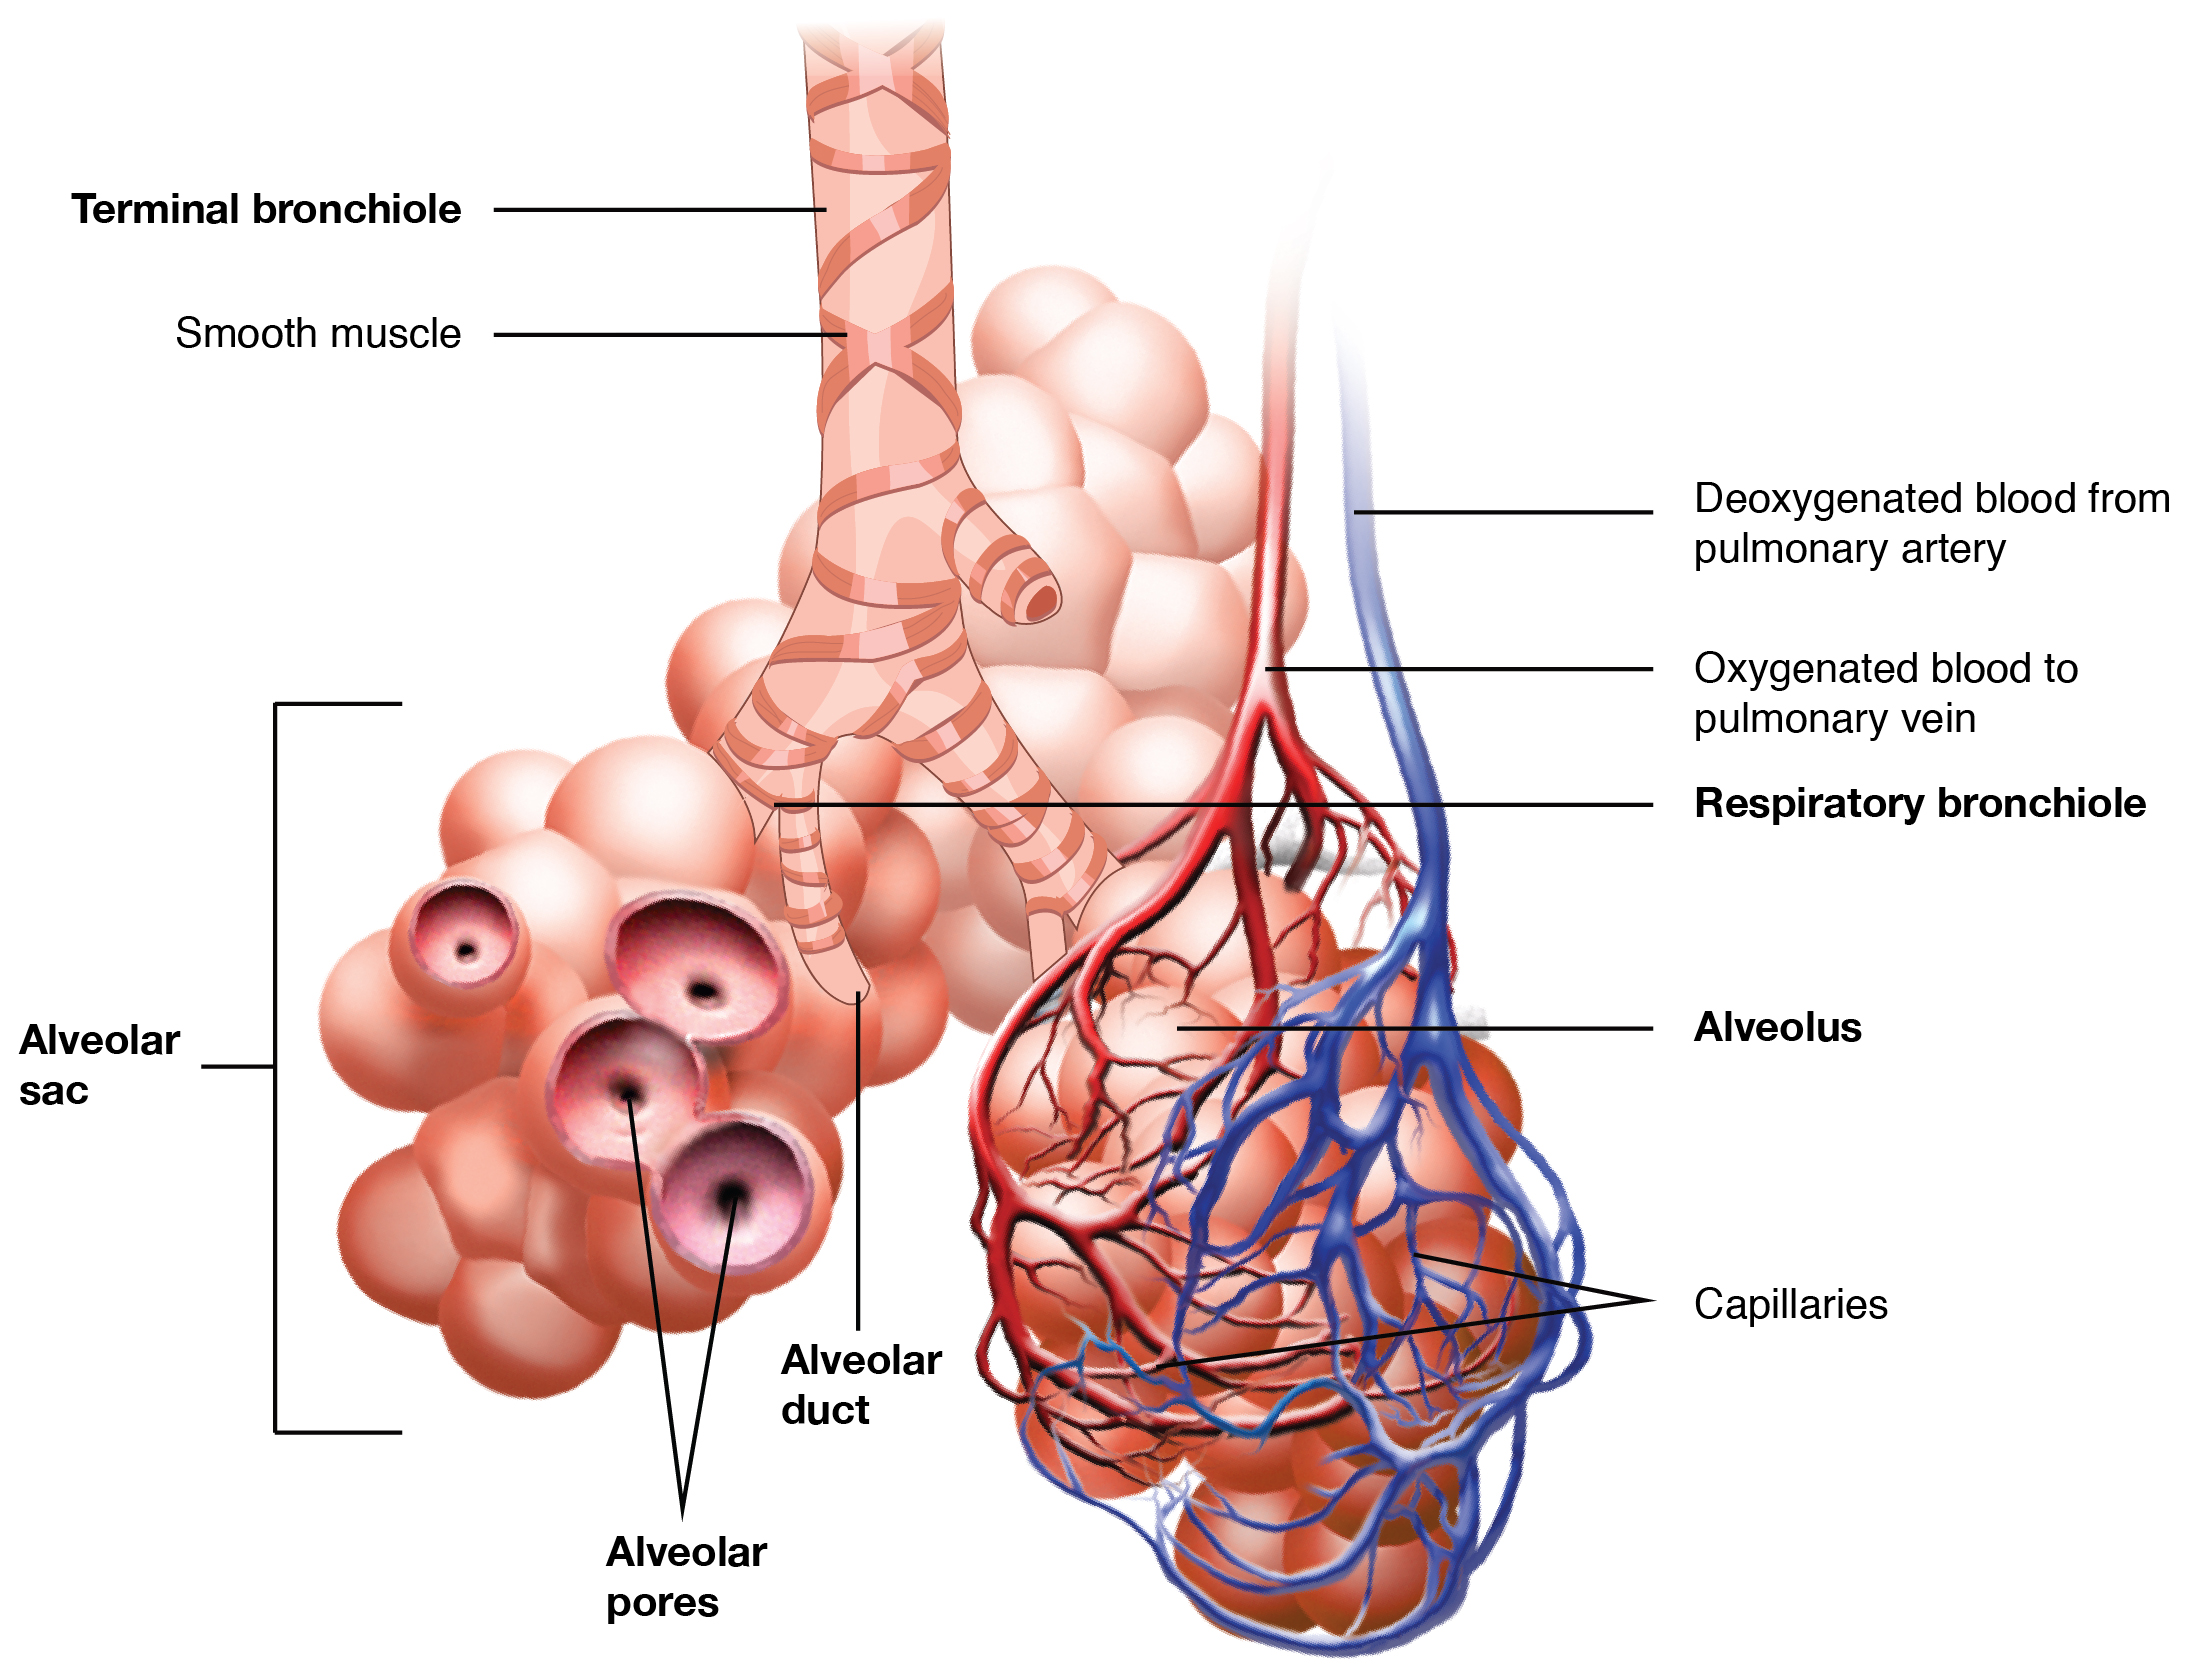 This image shows the bronchioles and alveolar sacs in the lungs and depicts the exchange of oxygenated and deoxygenated blood in the pulmonary blood vessels